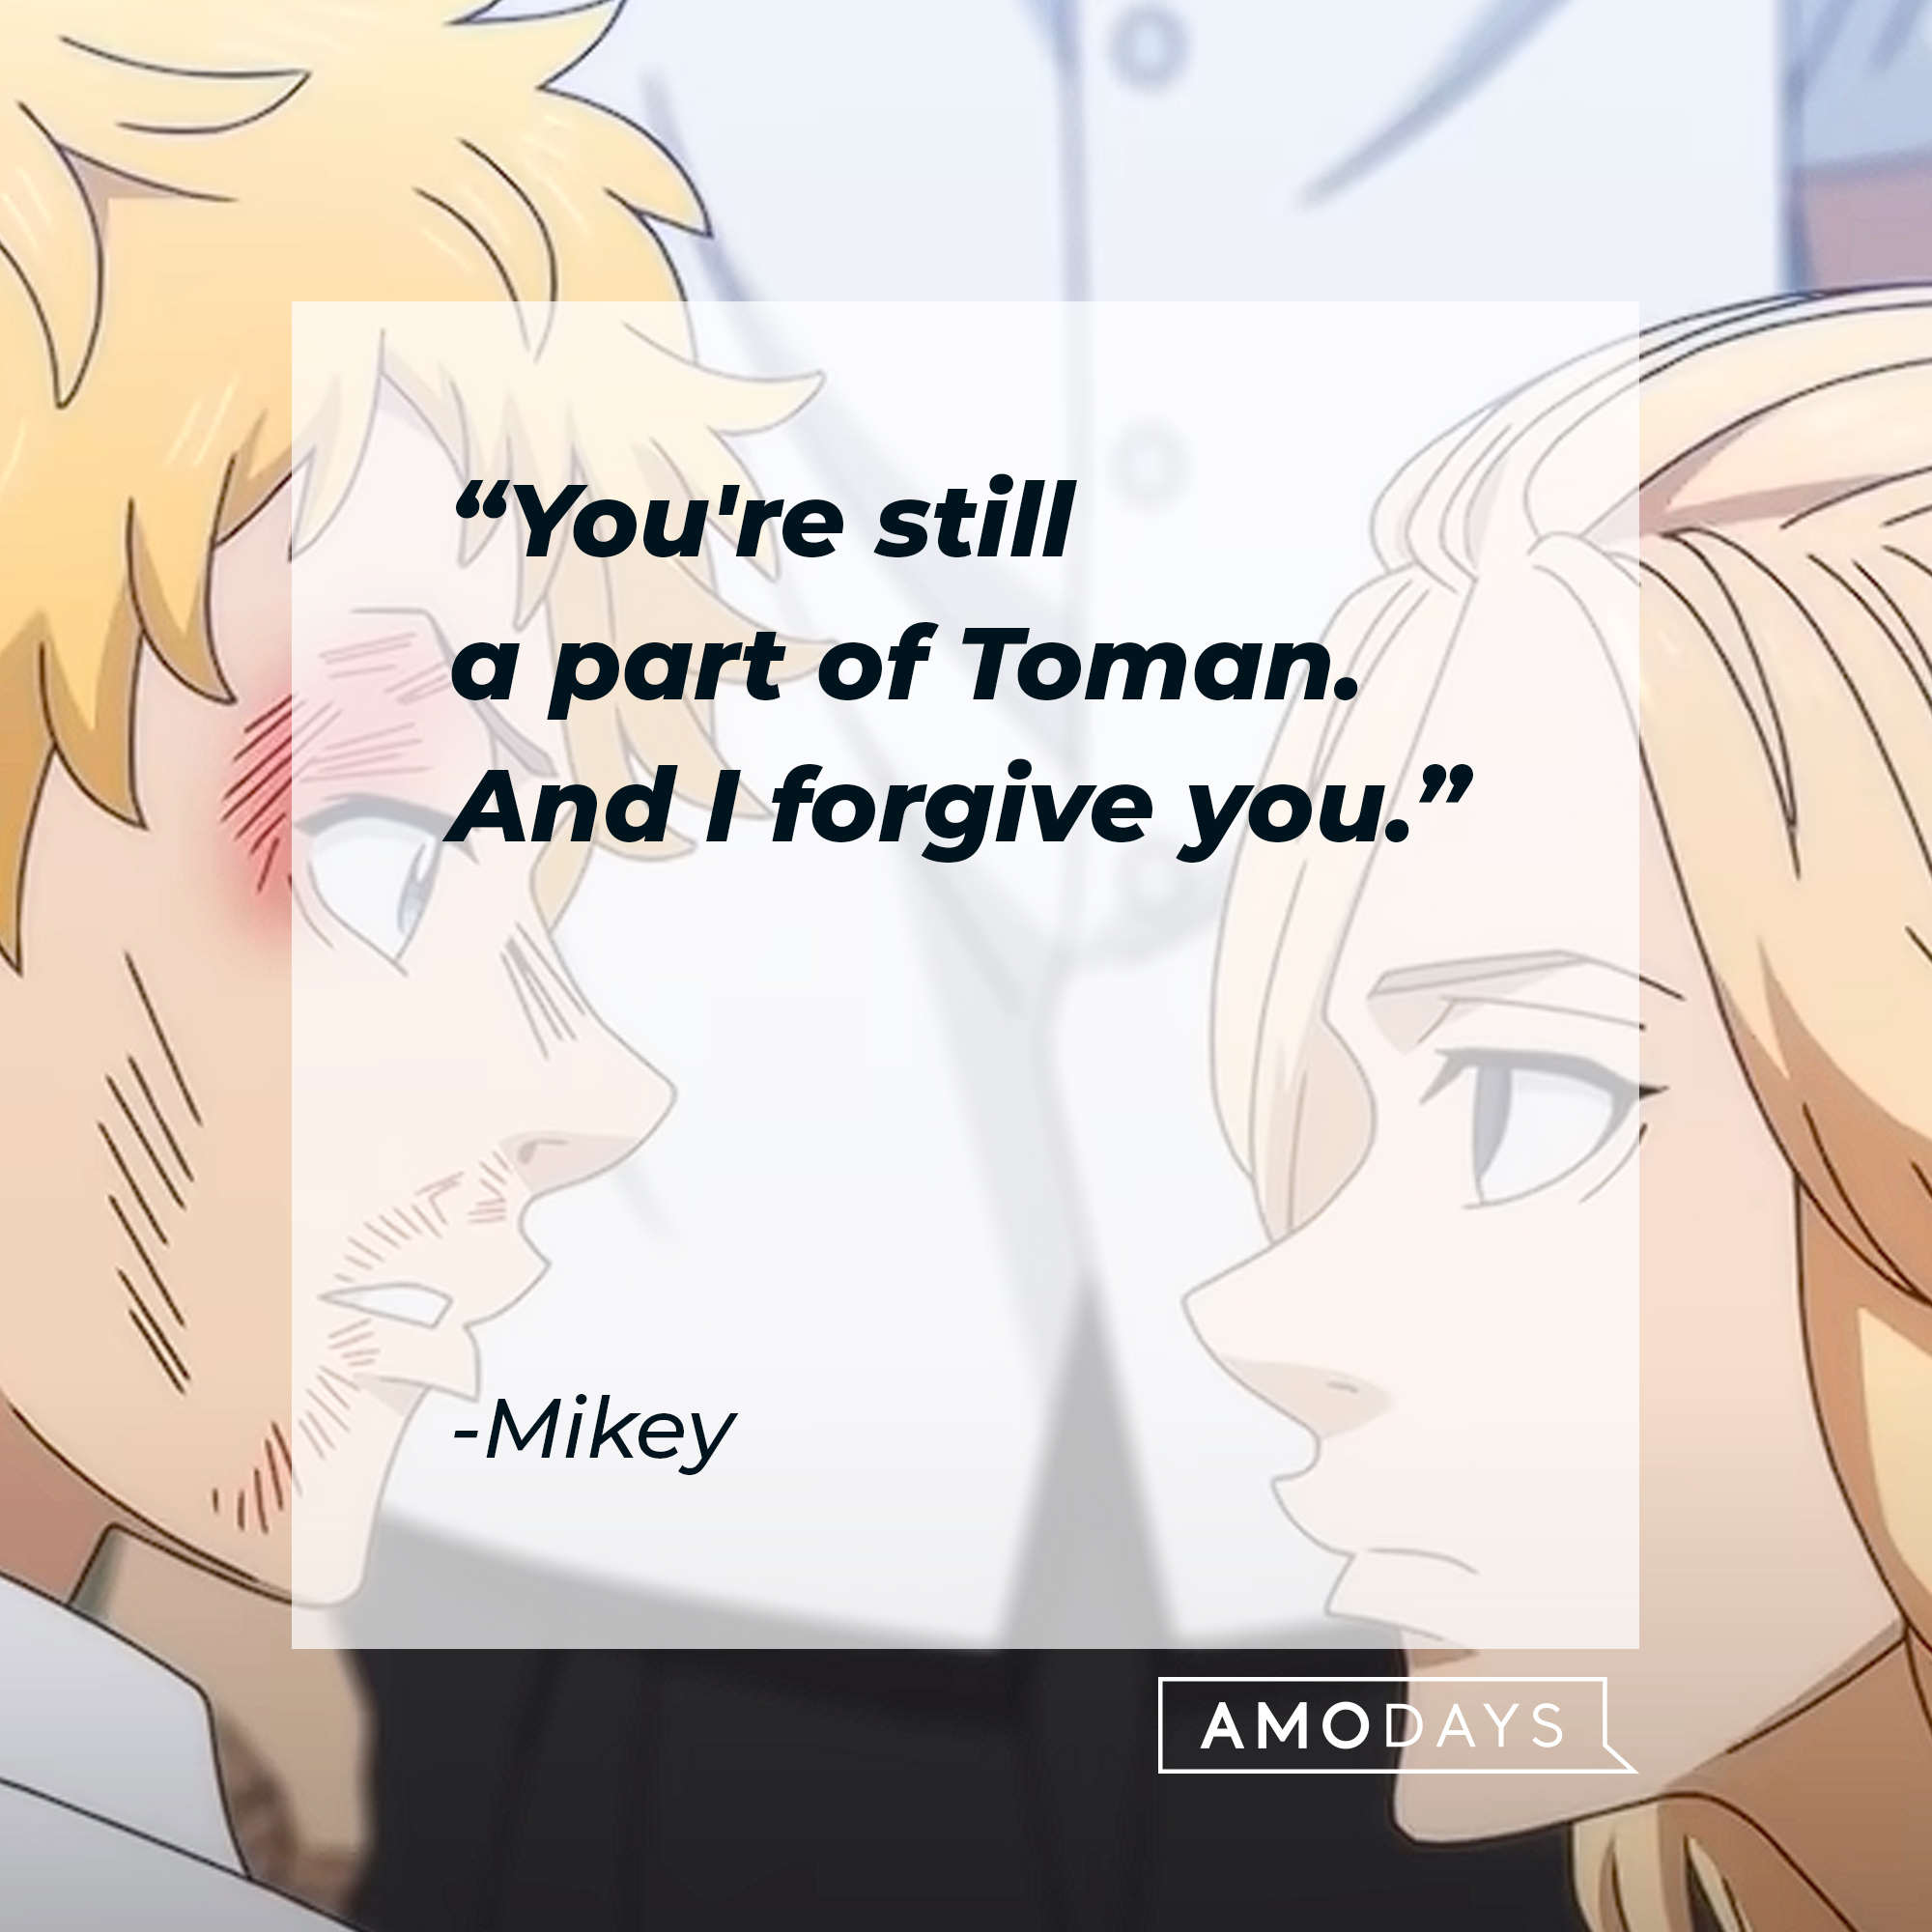 An image of Mikey and  Hanagaki Takemicchi with Mike’s quote: "You're still a part of Toman. And I forgive you." | Source: youtube.com/CrunchyrollCollection